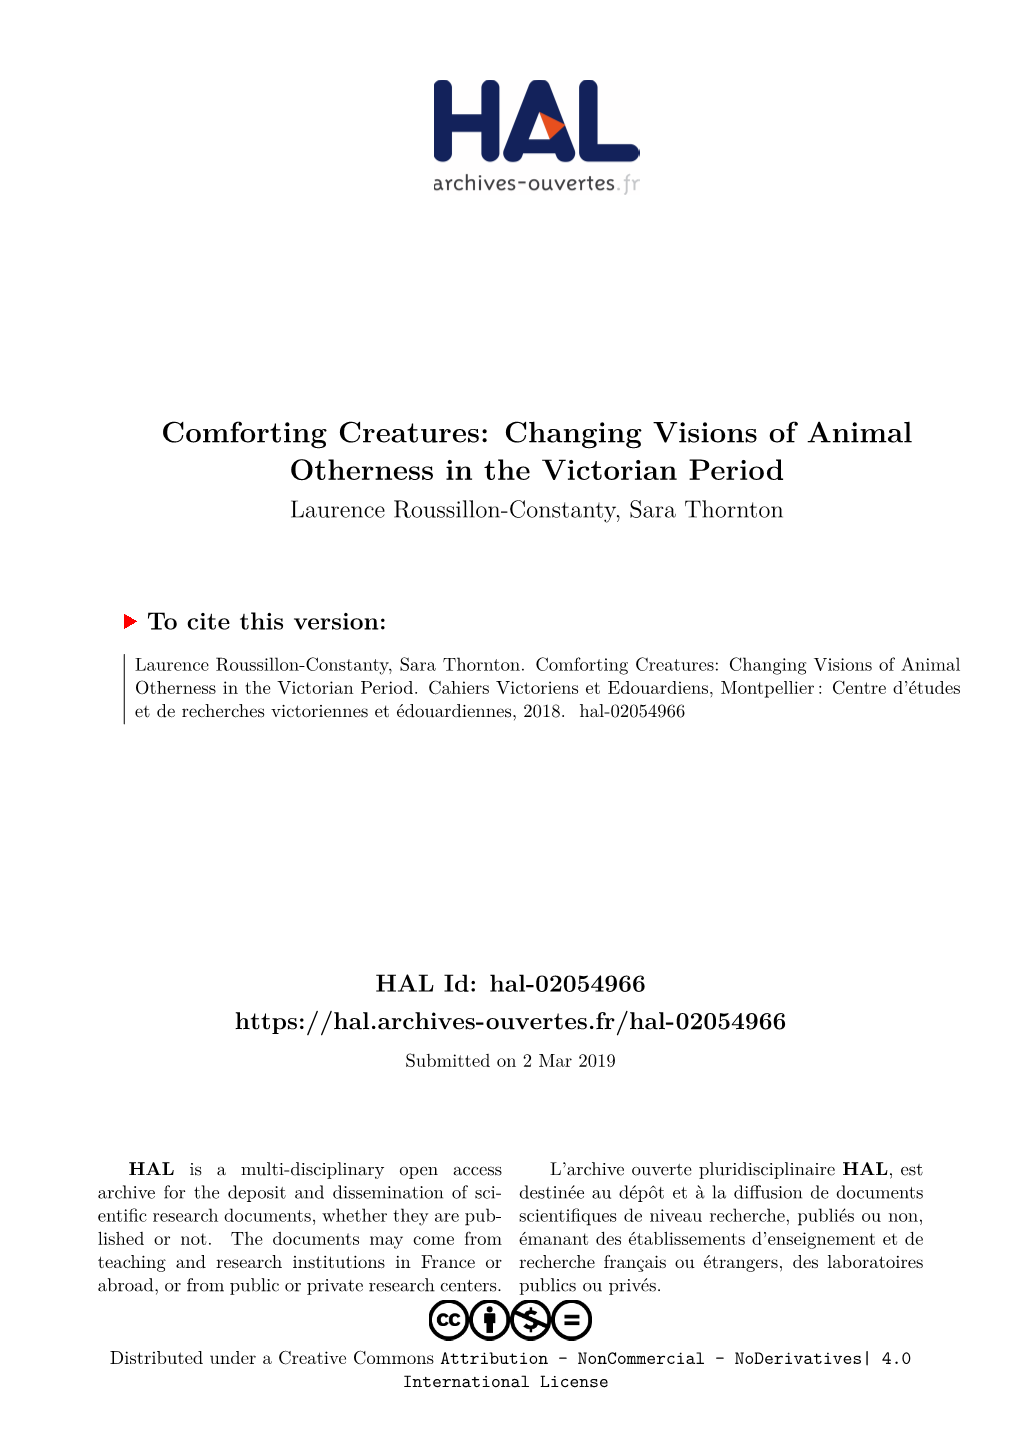 Changing Visions of Animal Otherness in the Victorian Period Laurence Roussillon-Constanty, Sara Thornton